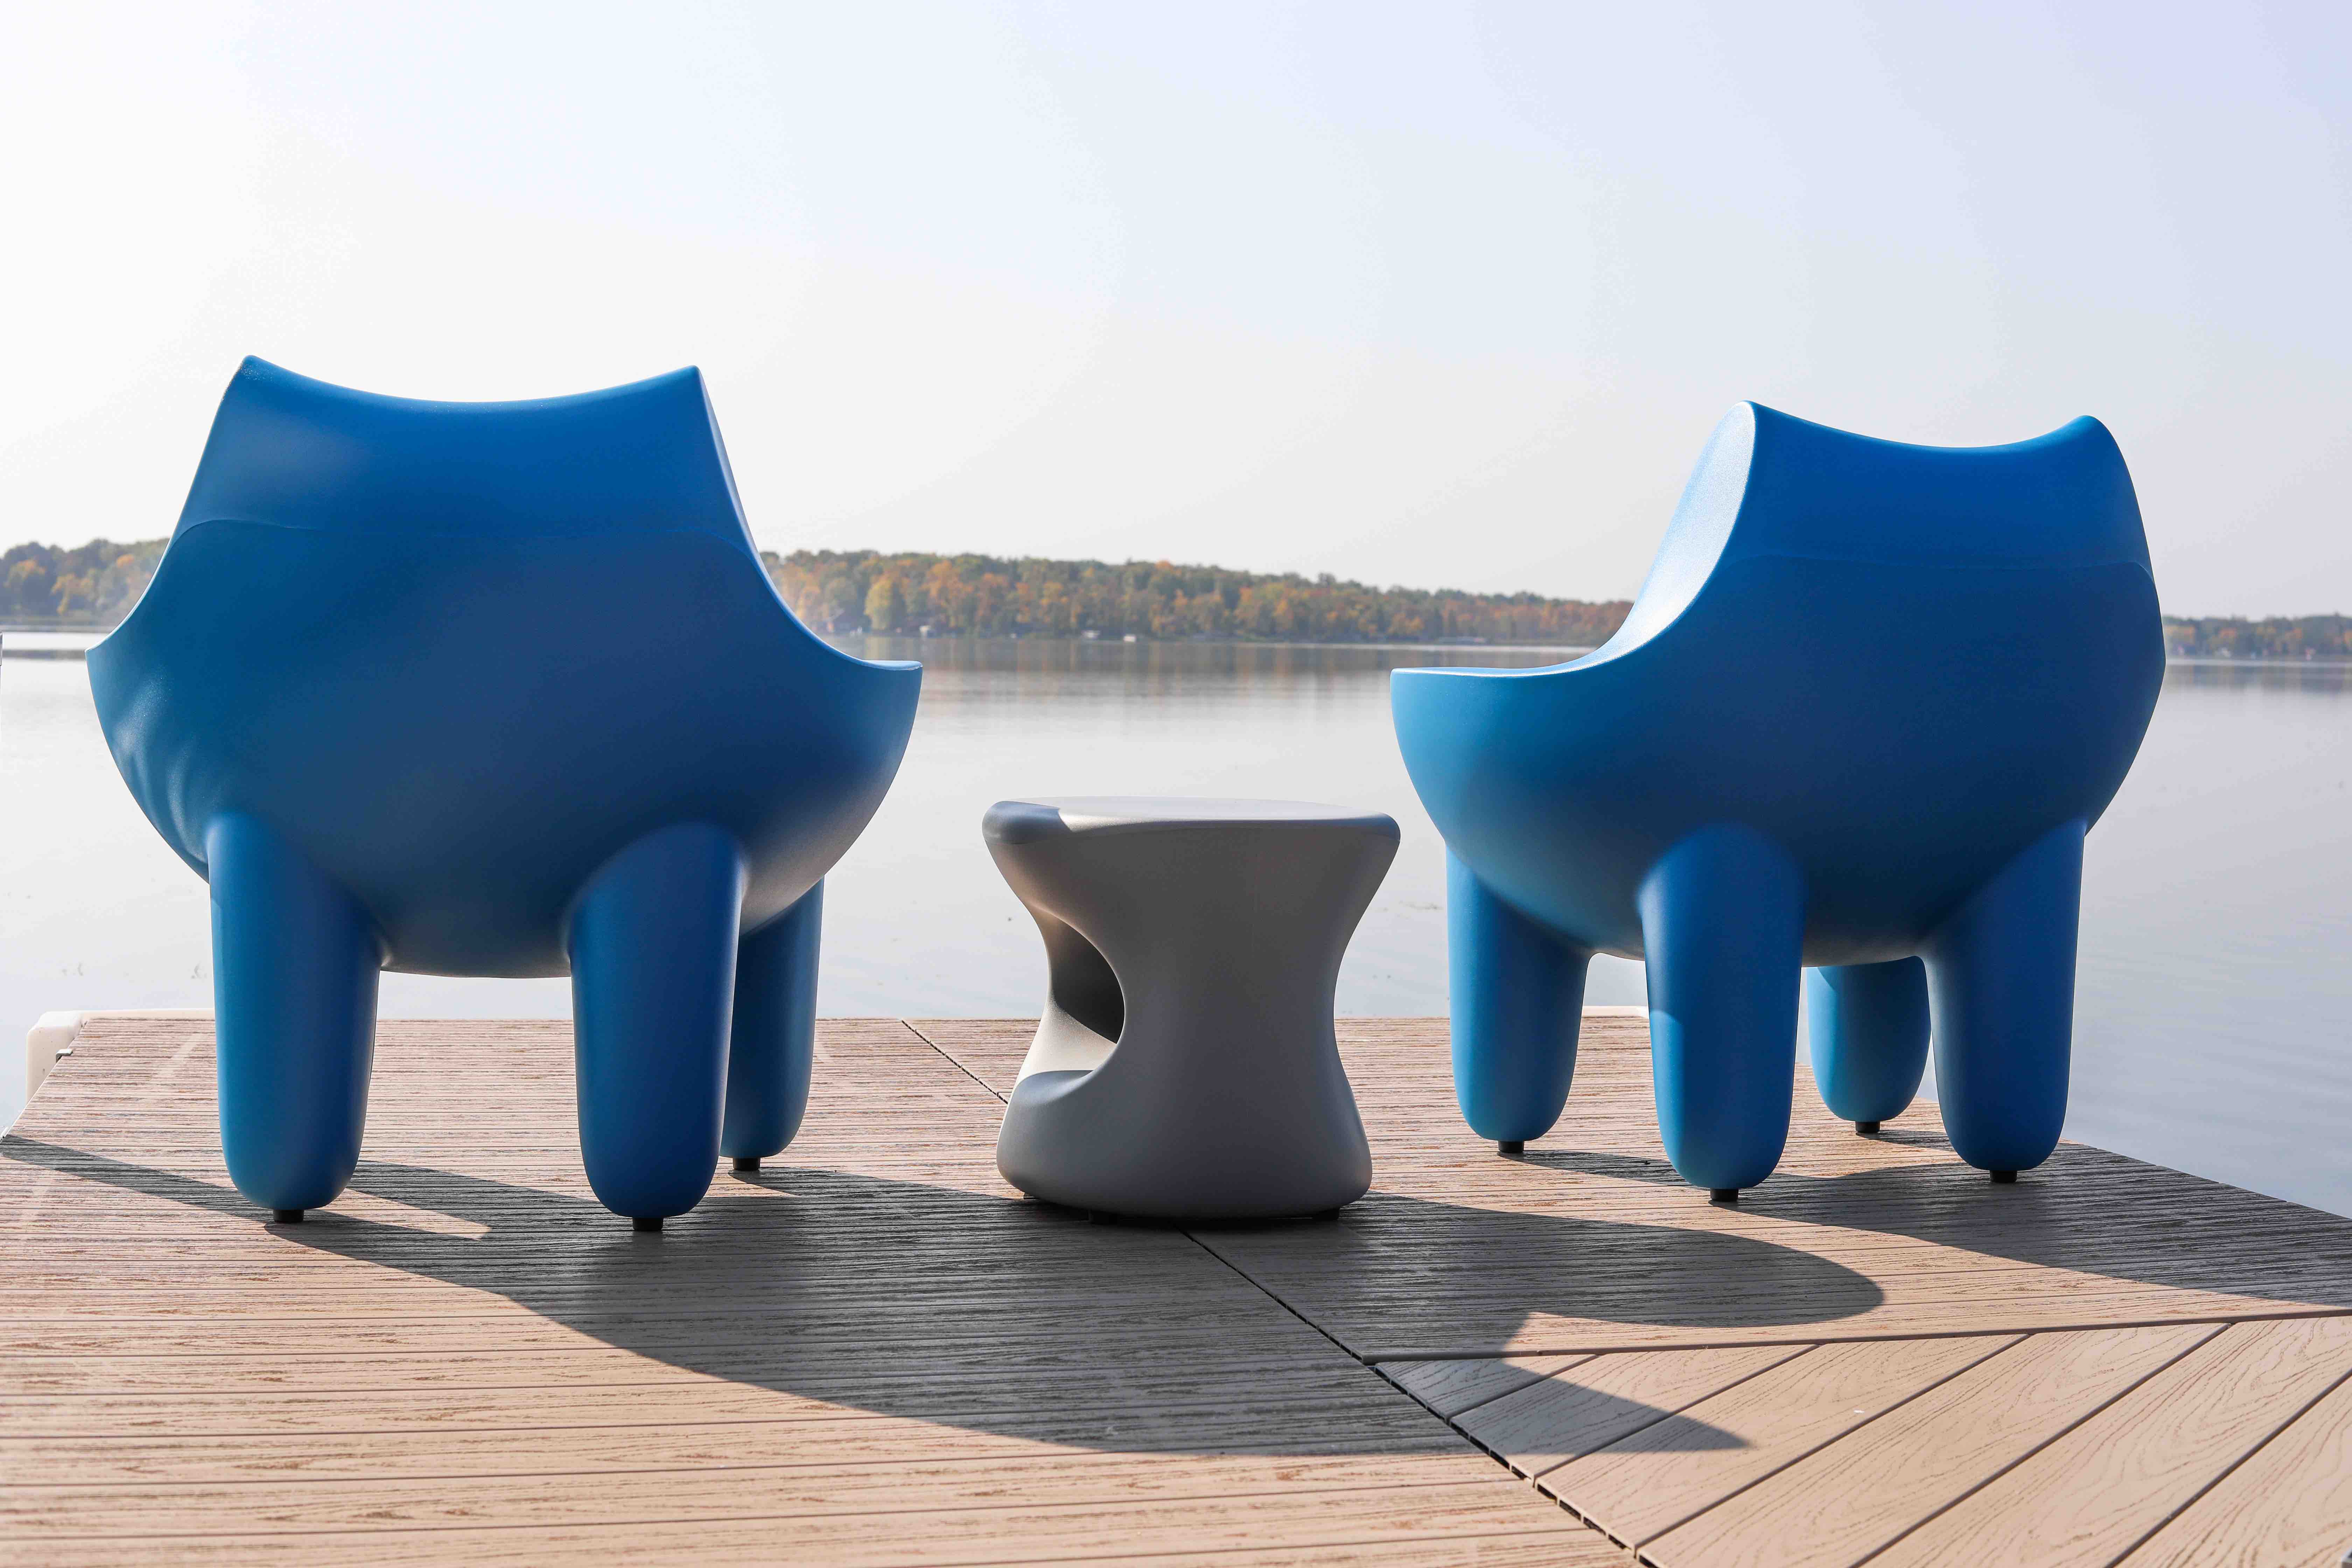 Mibster Chairs with Amped Table on dock